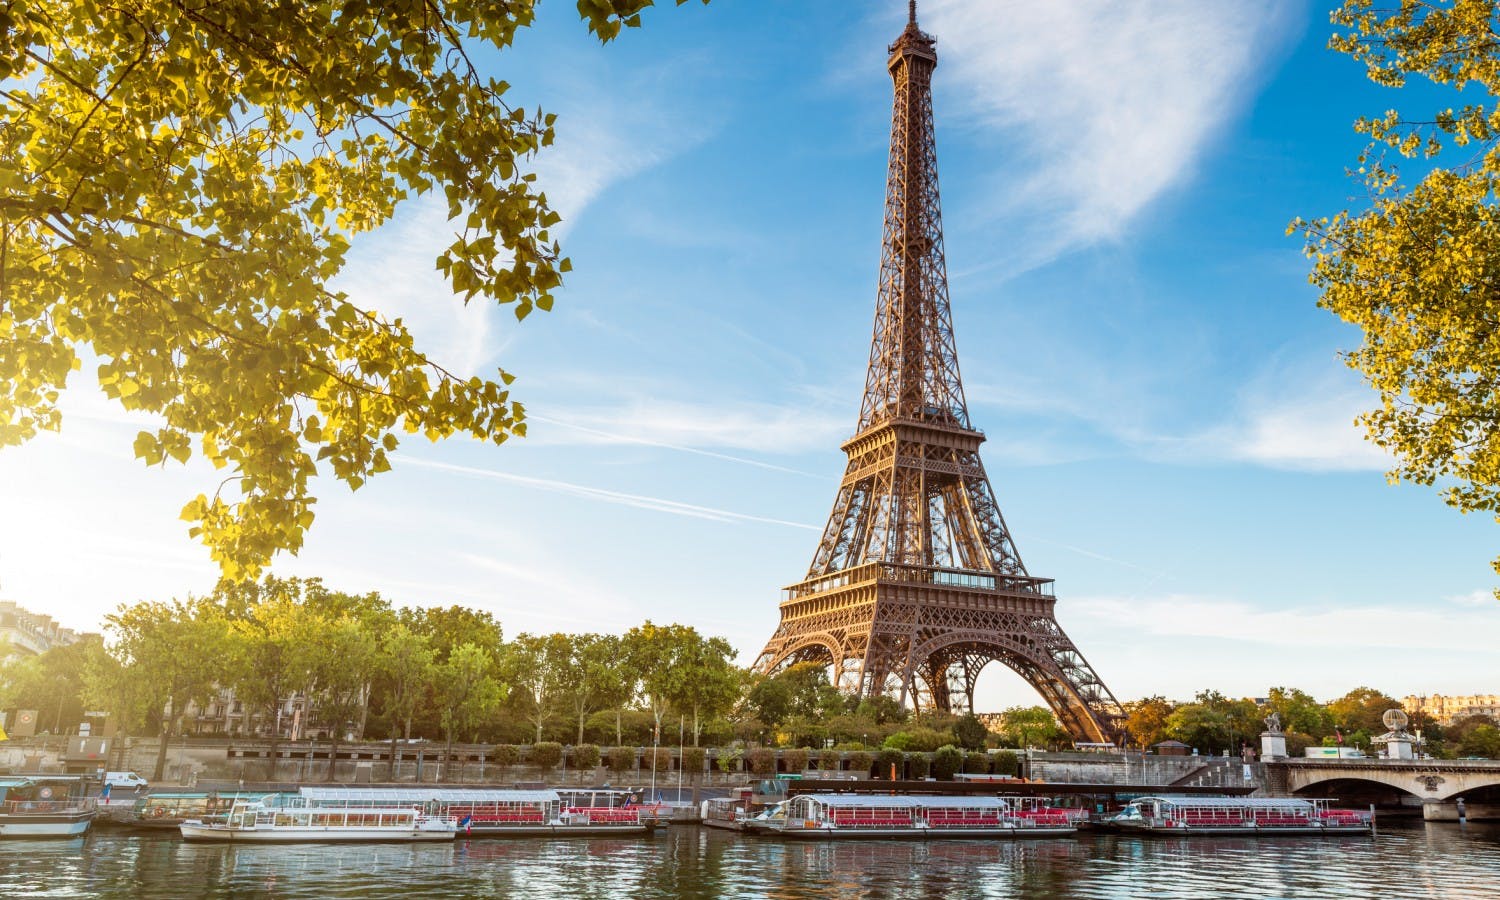 Paris Up&Down: City Tour, Skip the Line Tickets to the Eiffel Tower and Seine Cruise